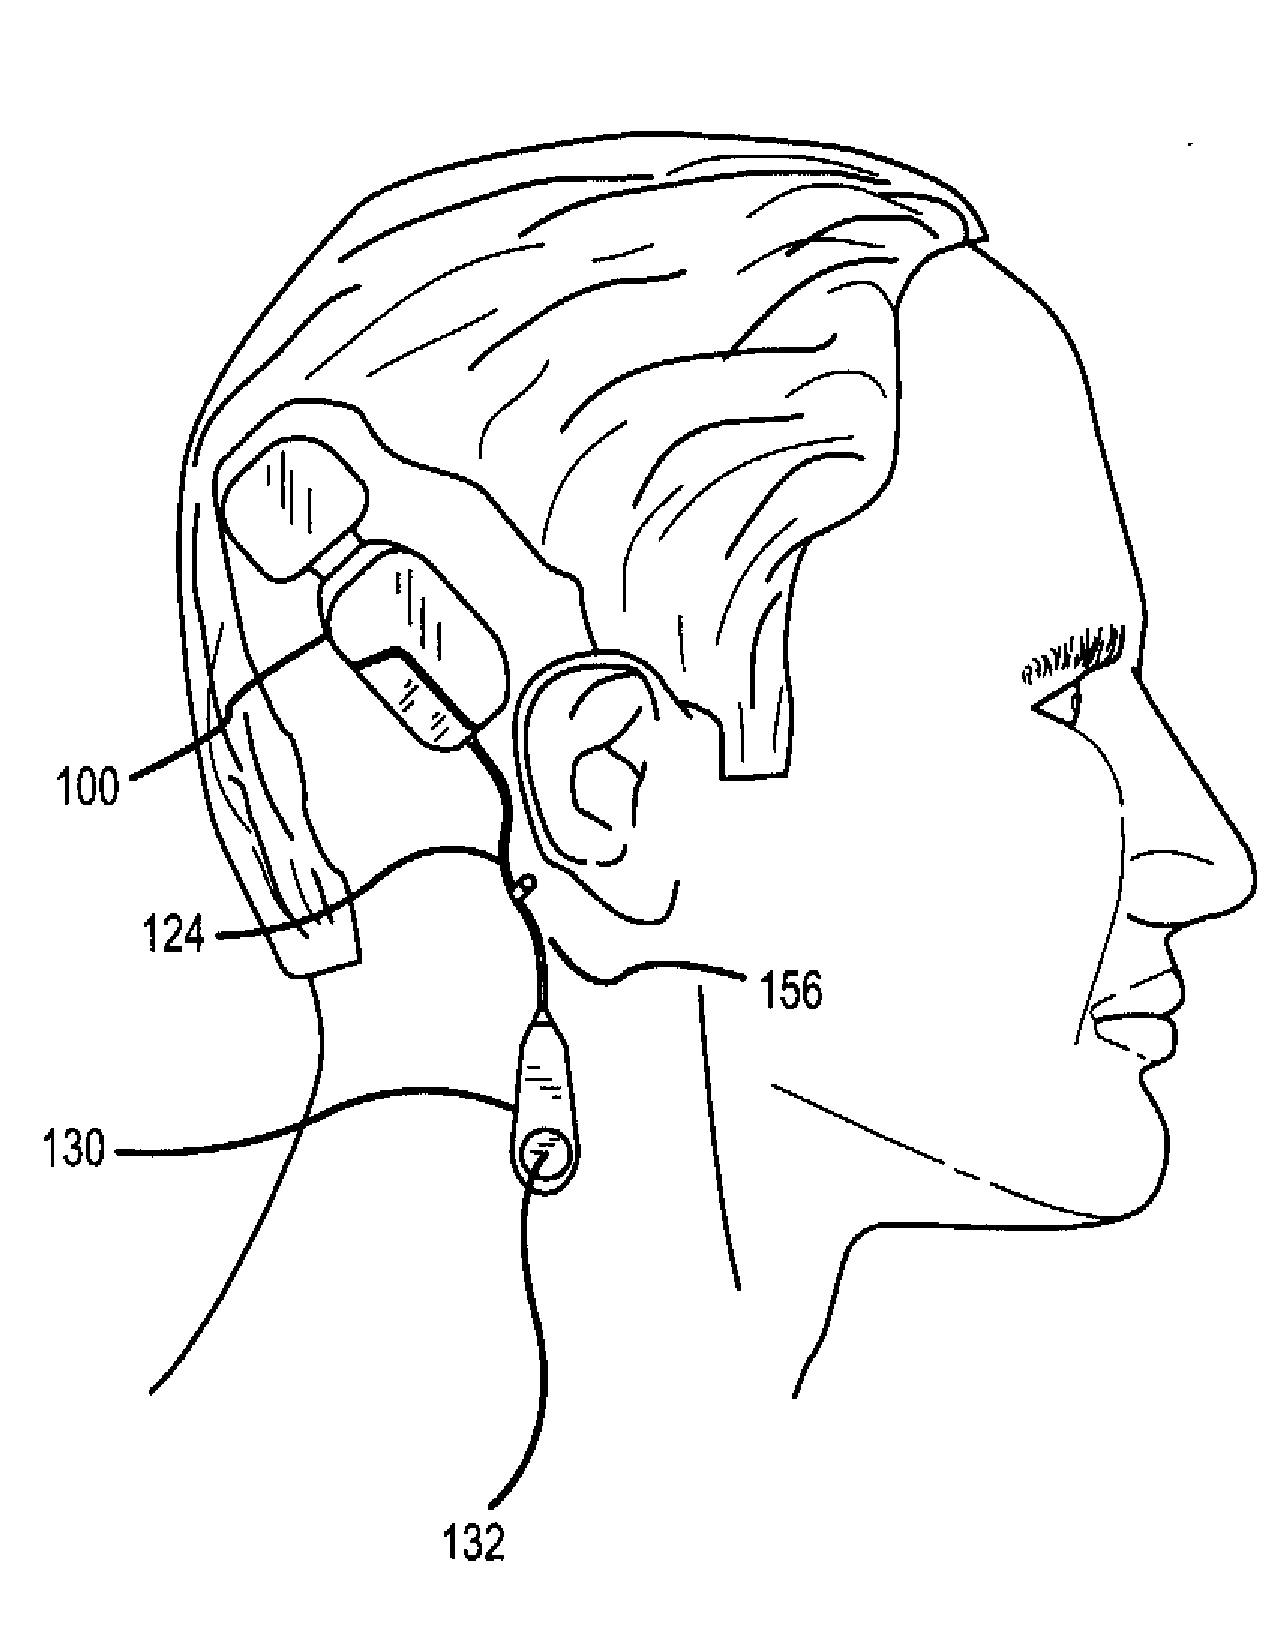 Systems and methods for securing subcutaneous implanted devices